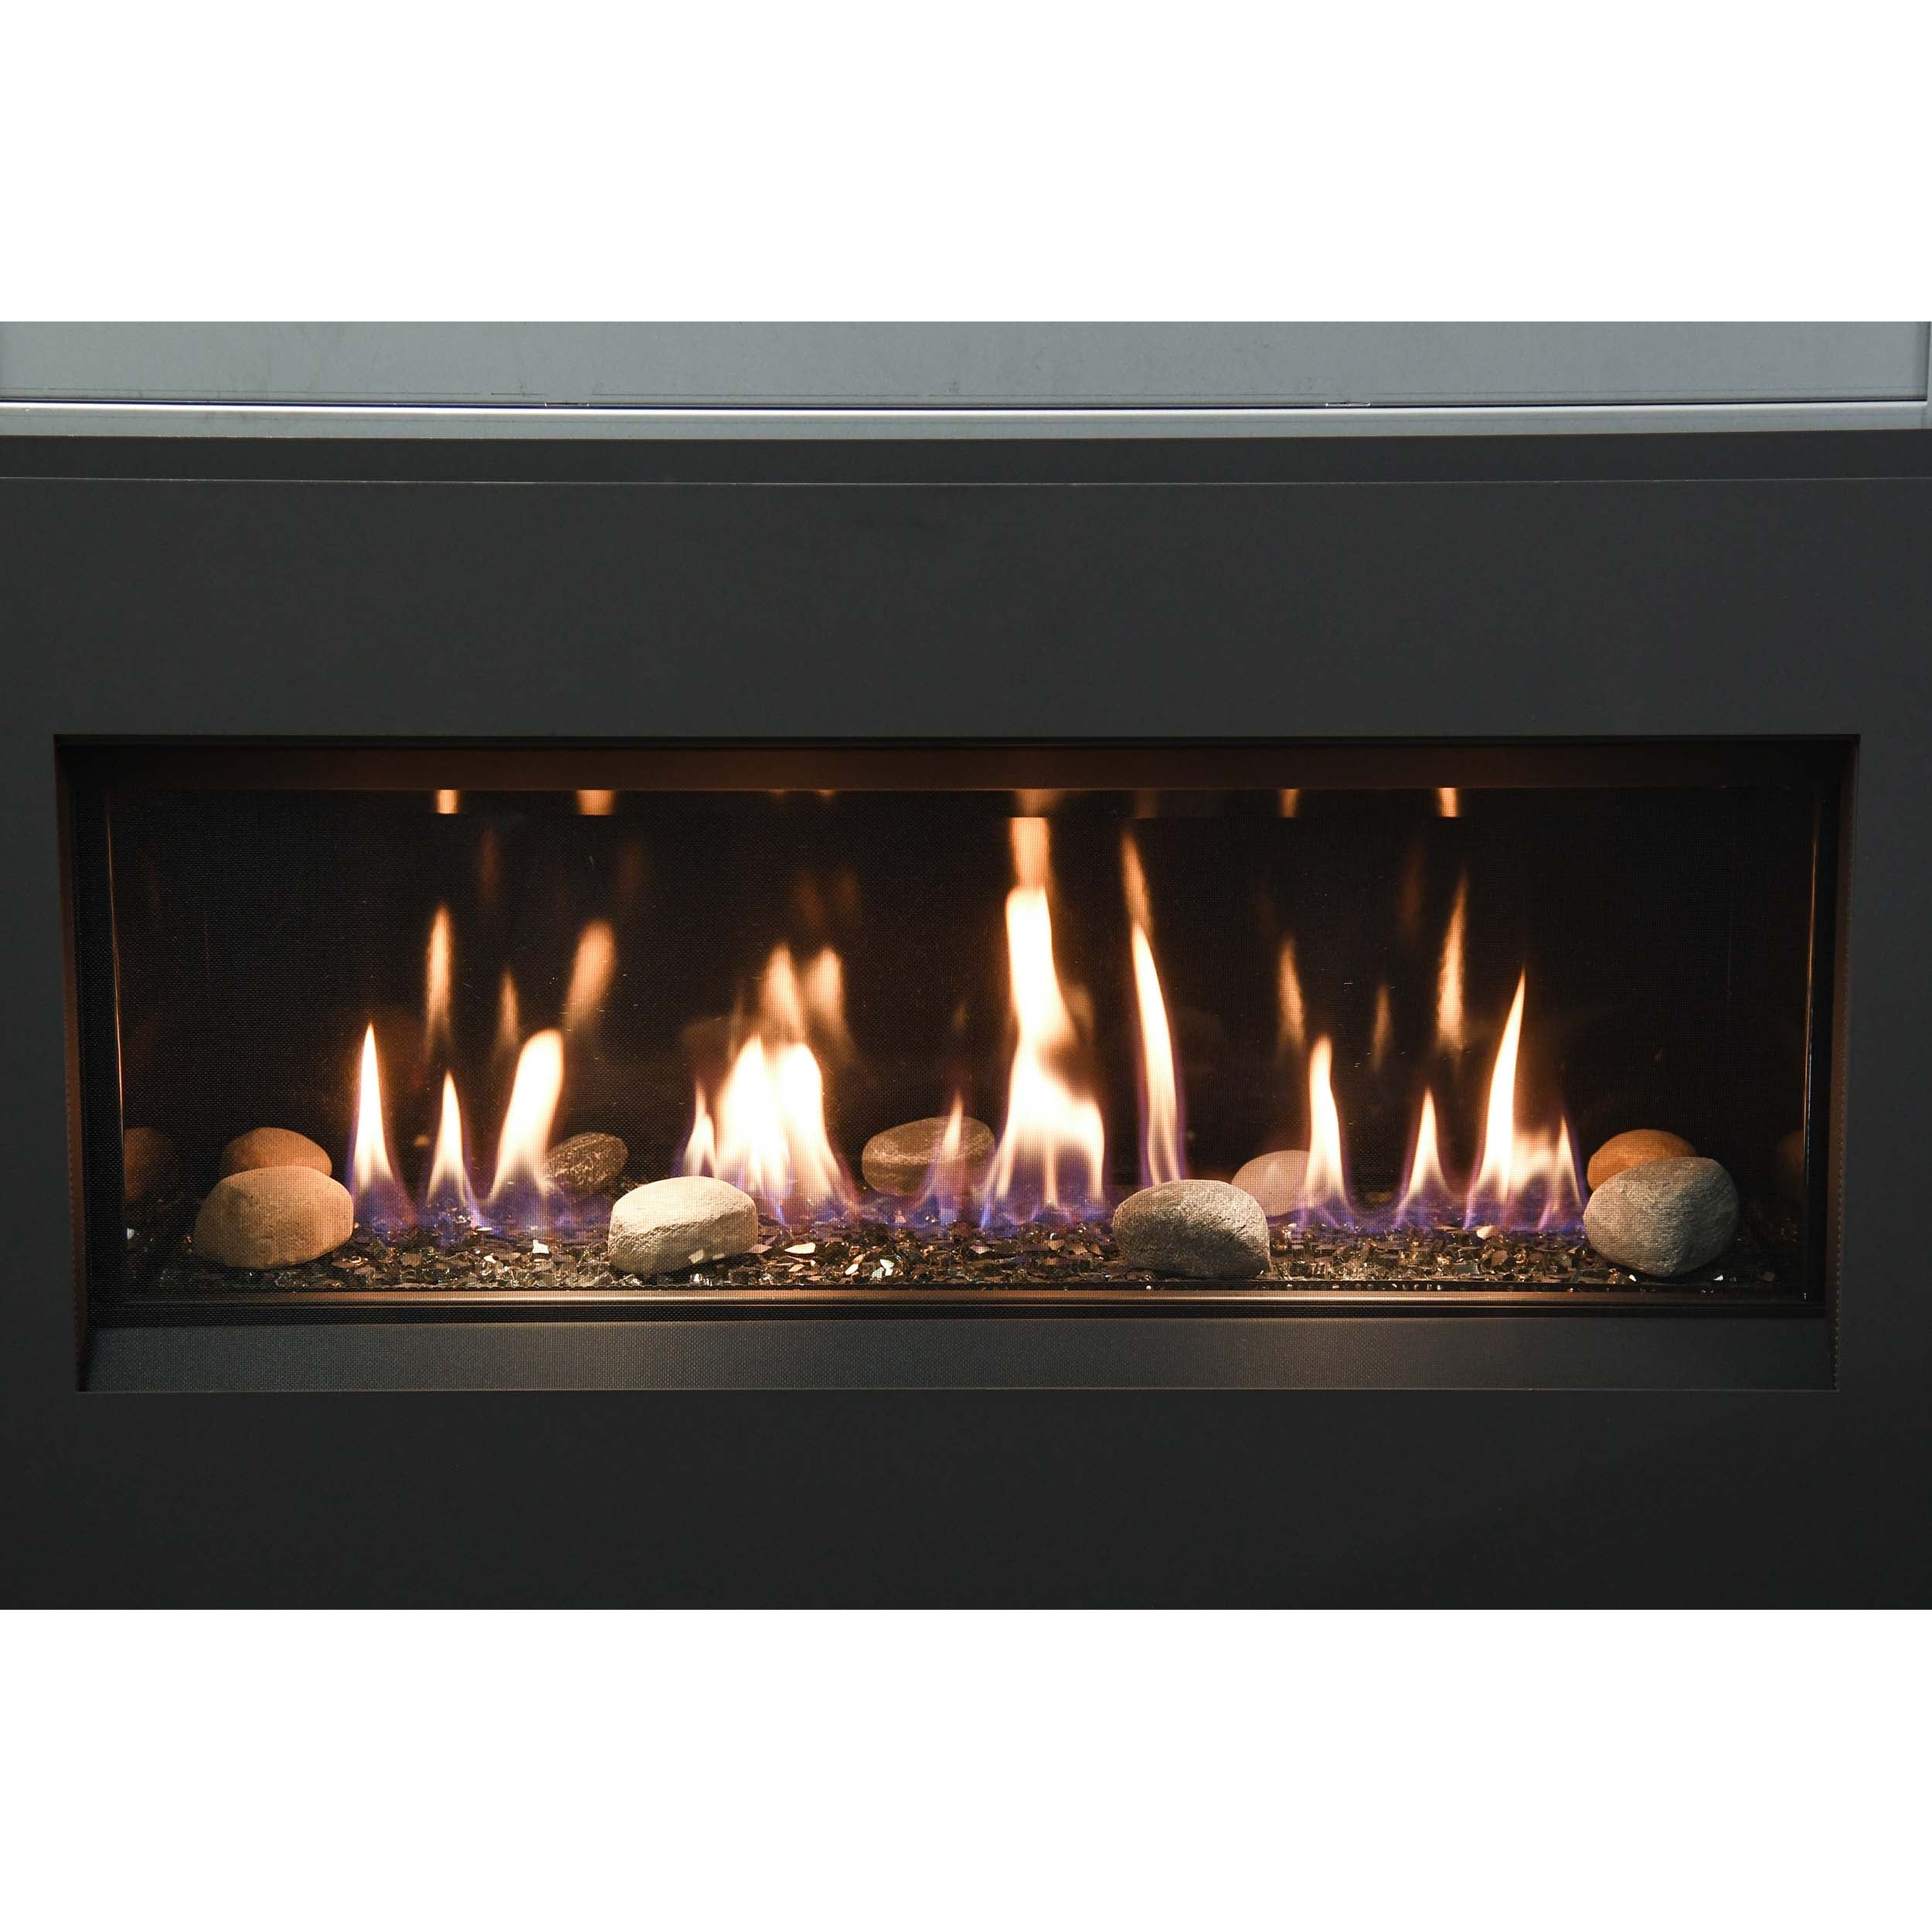 Pacific Energy Espirit 32" Direct Vent Linear Gas Fireplace